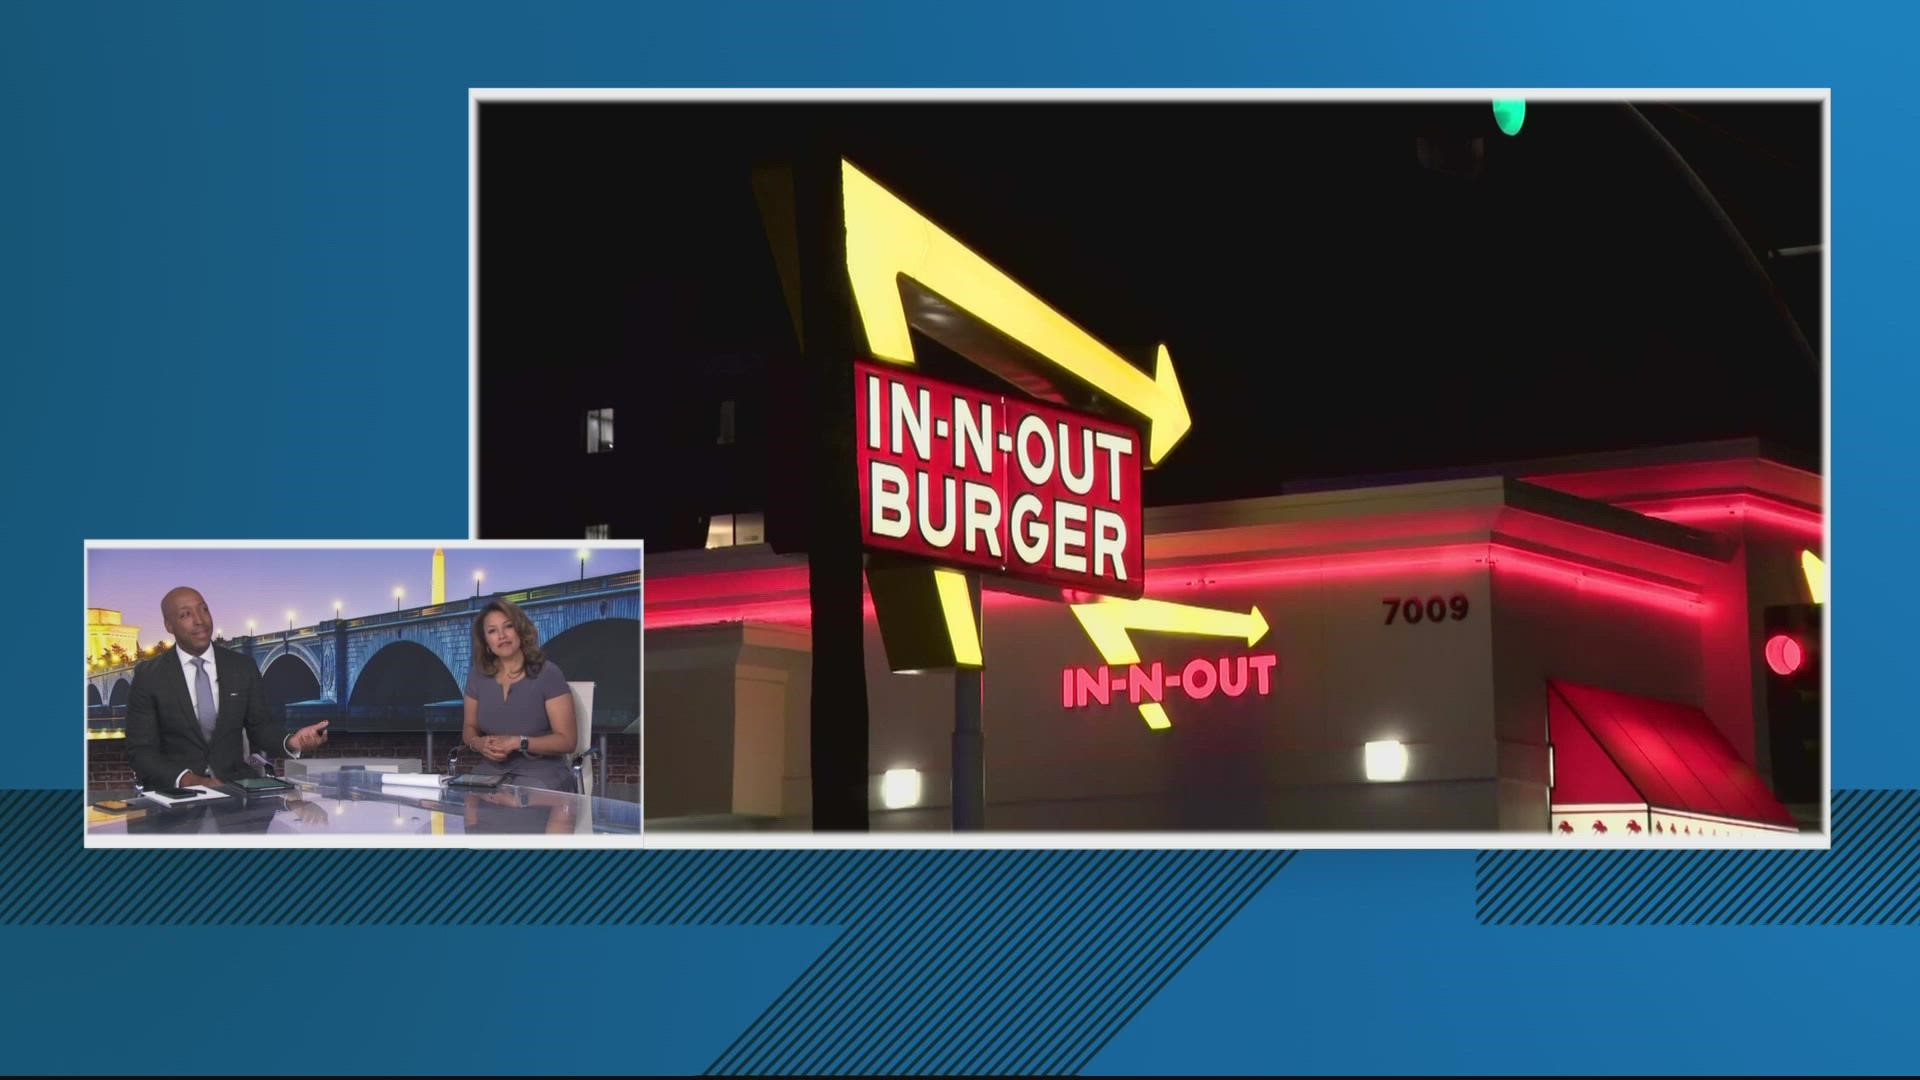 The company expects to open new restaurants in and around Nashville, Tennessee in 20-26. In-N-Out will also build its first Eastern U-S office in Tennessee.